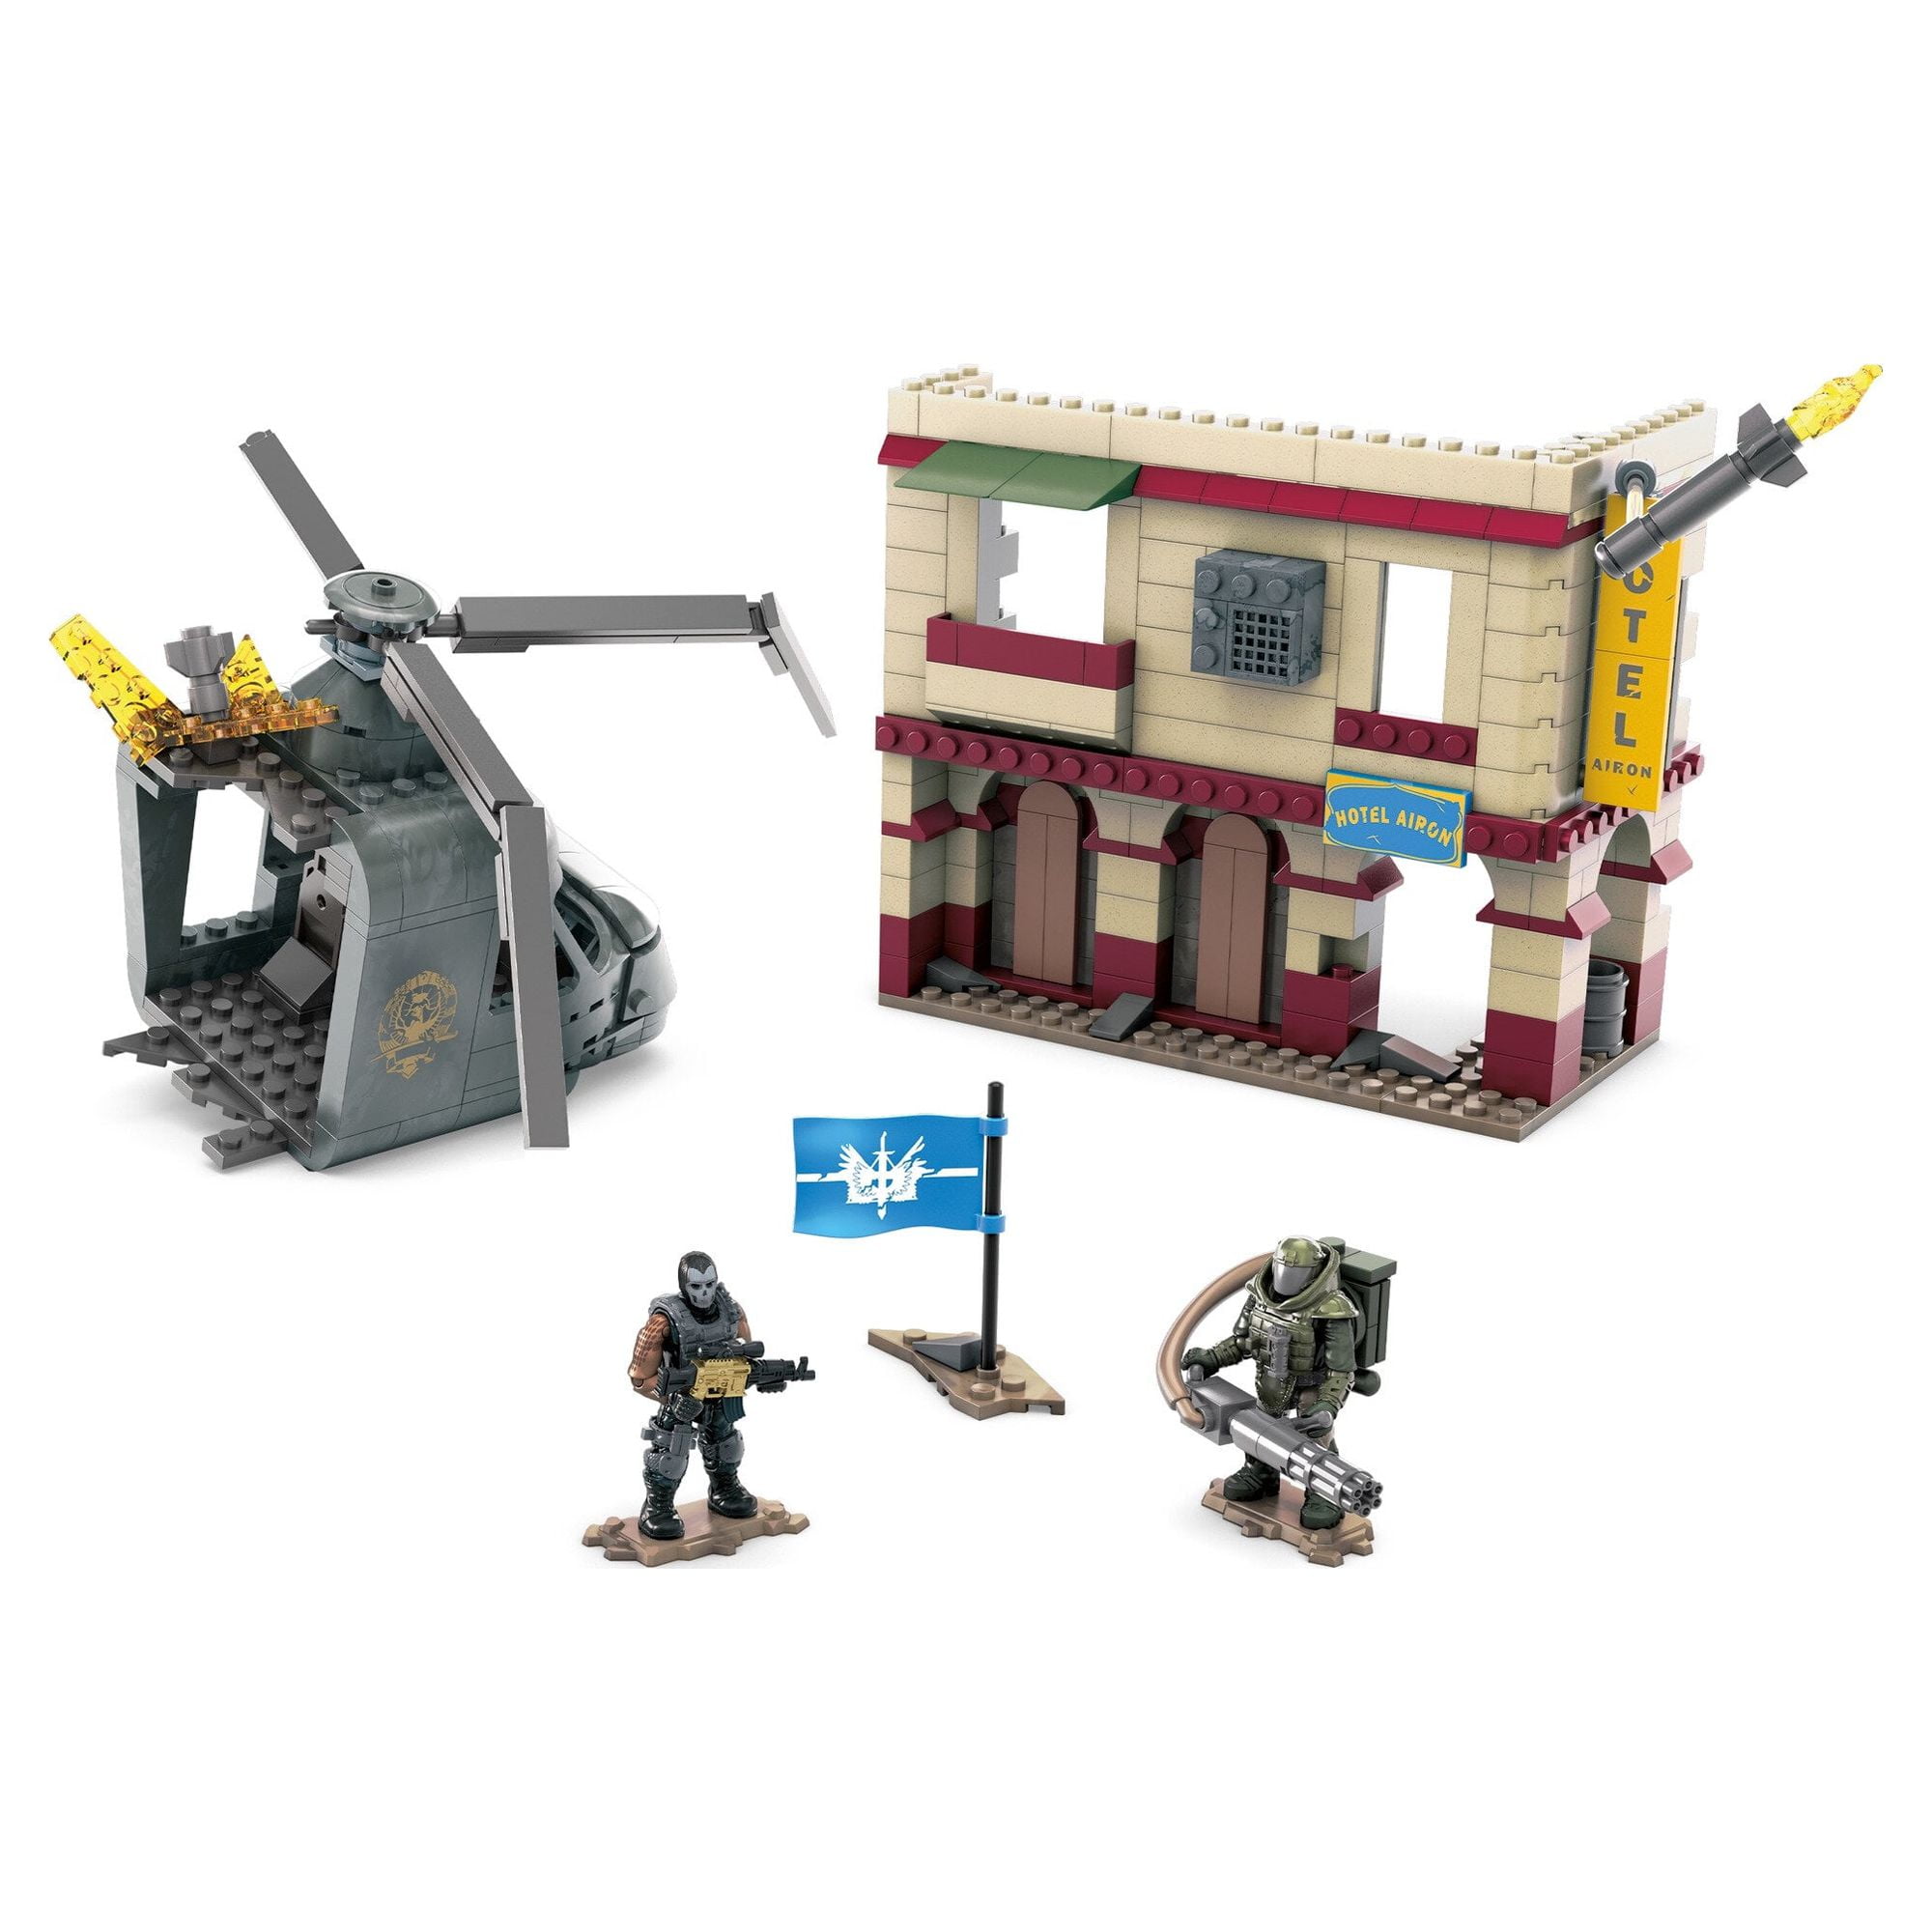 MEGA Call of Duty Crash Site Battle Building Toy with 2 Figures (456 Pieces)